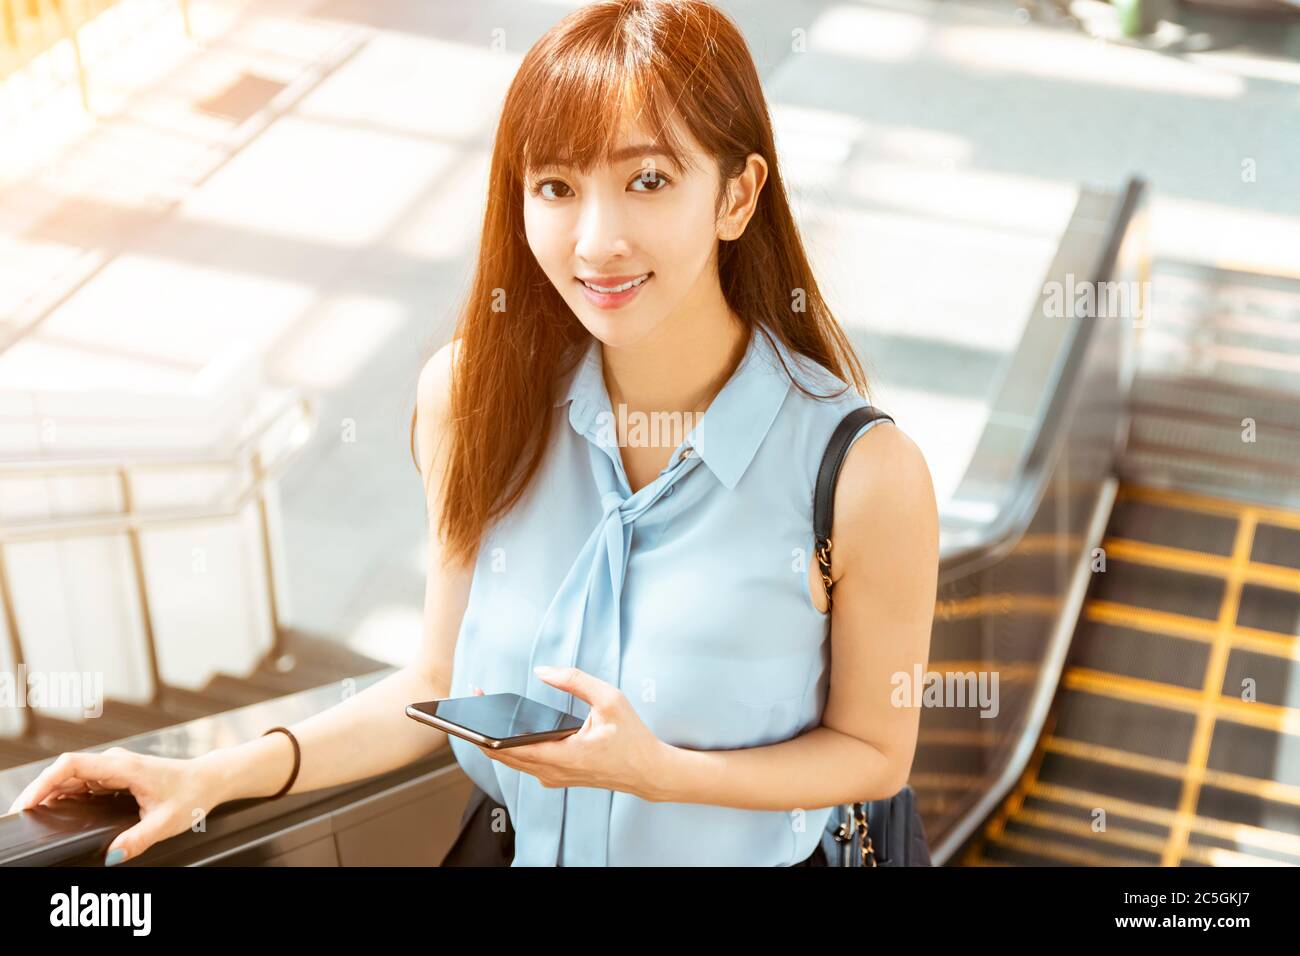 young business Woman Going To Work and holding the  mobile Phone Stock Photo